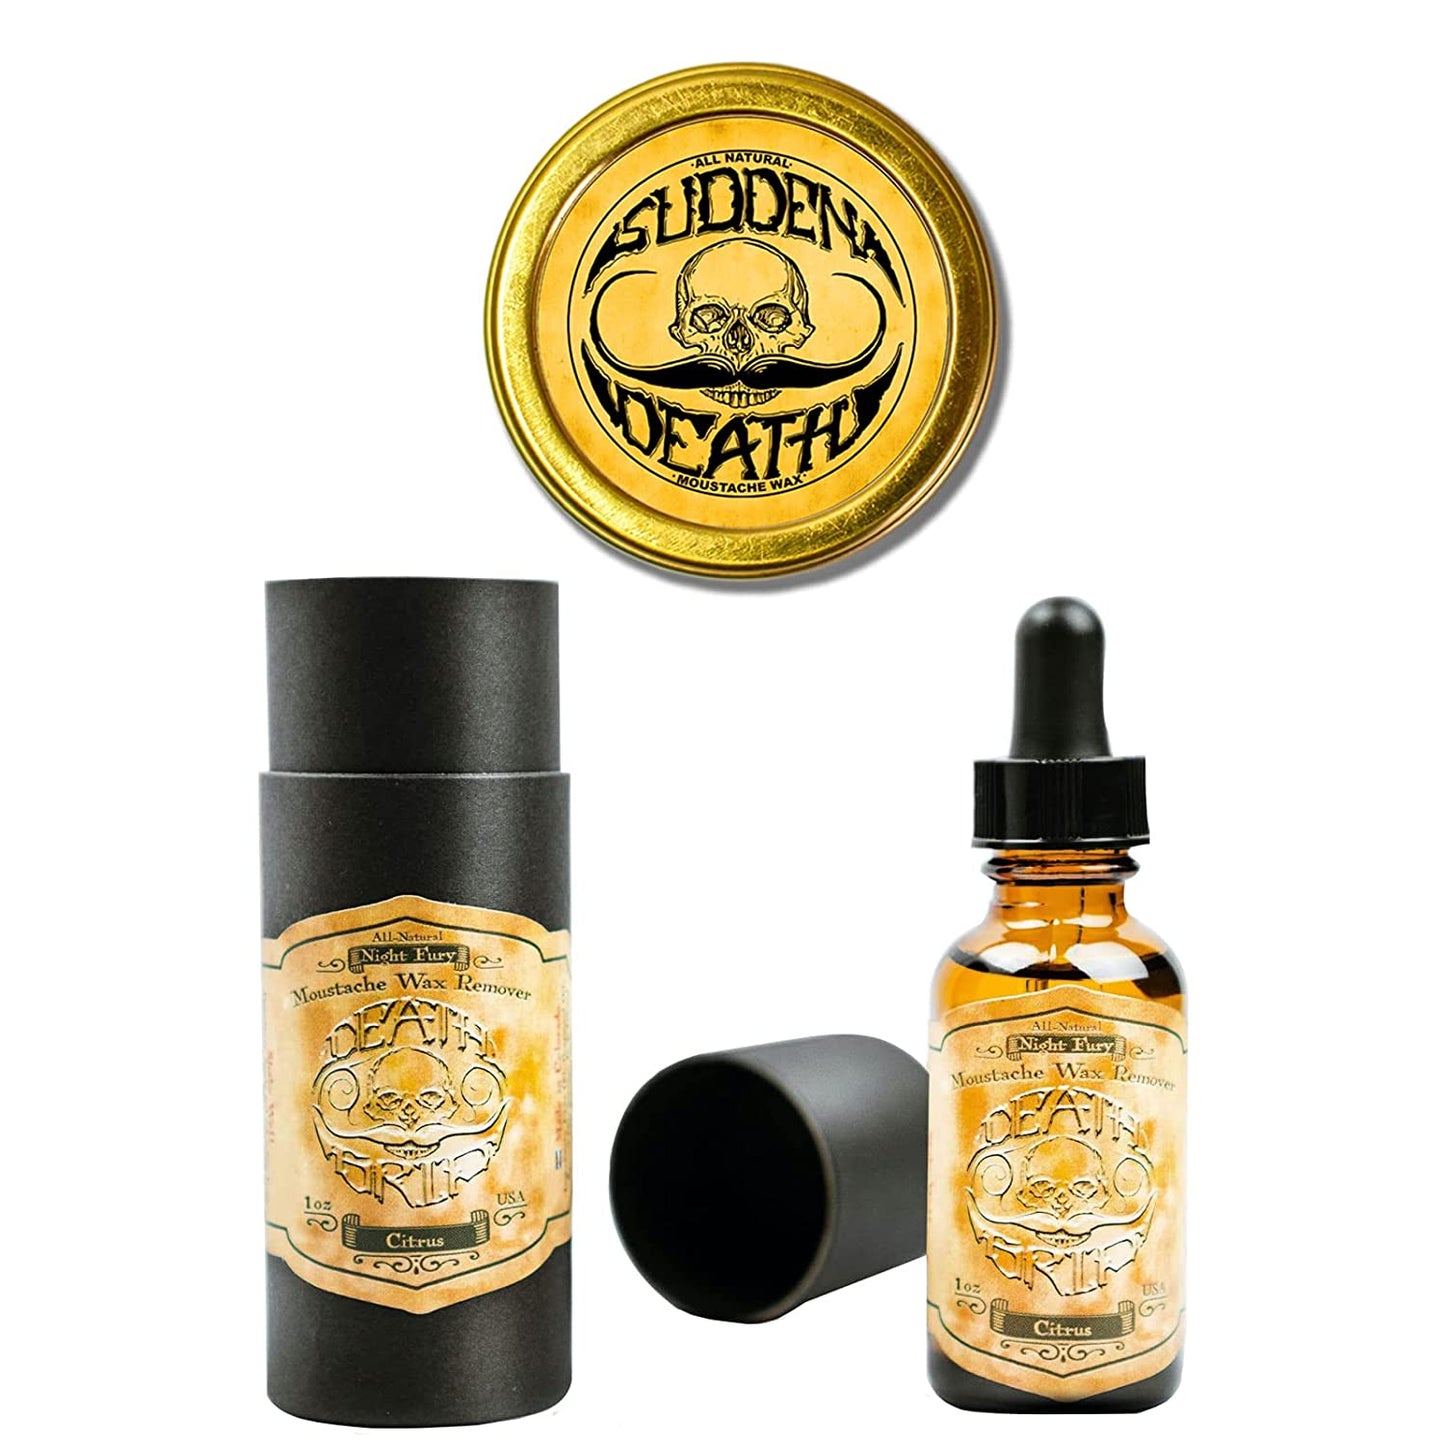 Sudden Death Strong Hold Mustache Wax and Night Fury Mustache Wax Remo –  Death-Grip